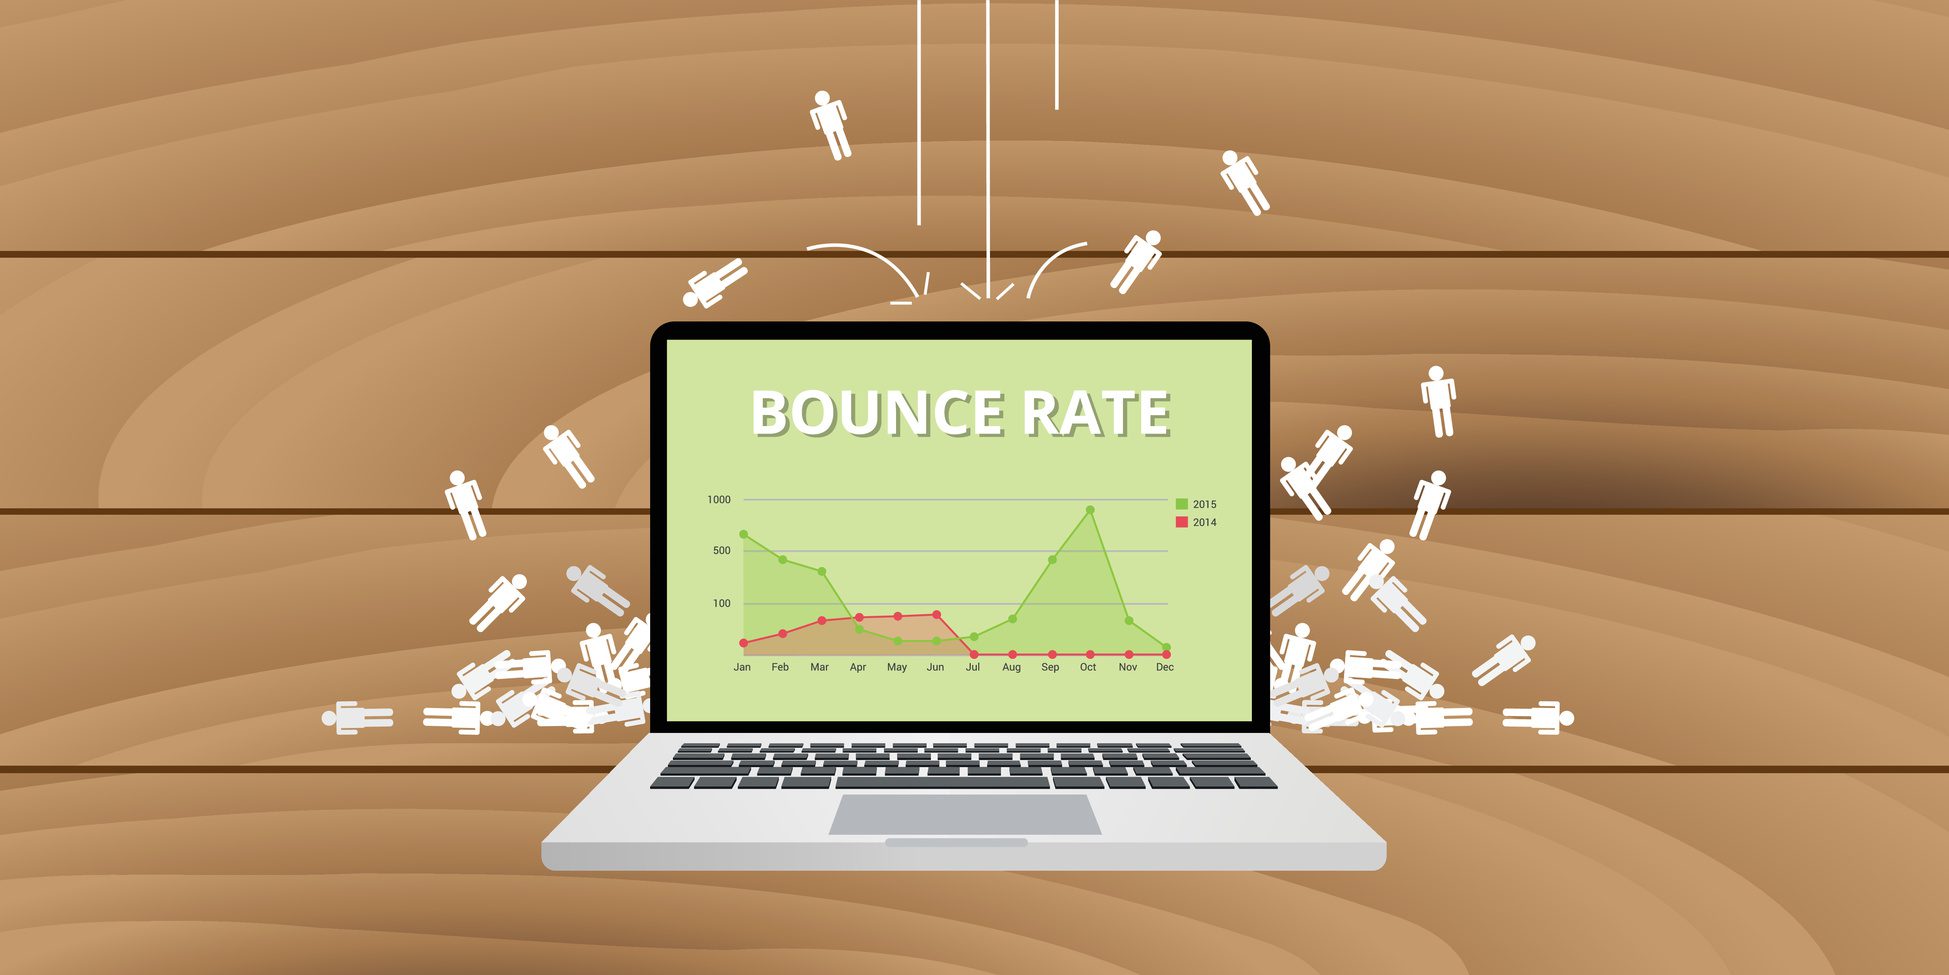 What Is Bounce Rate?